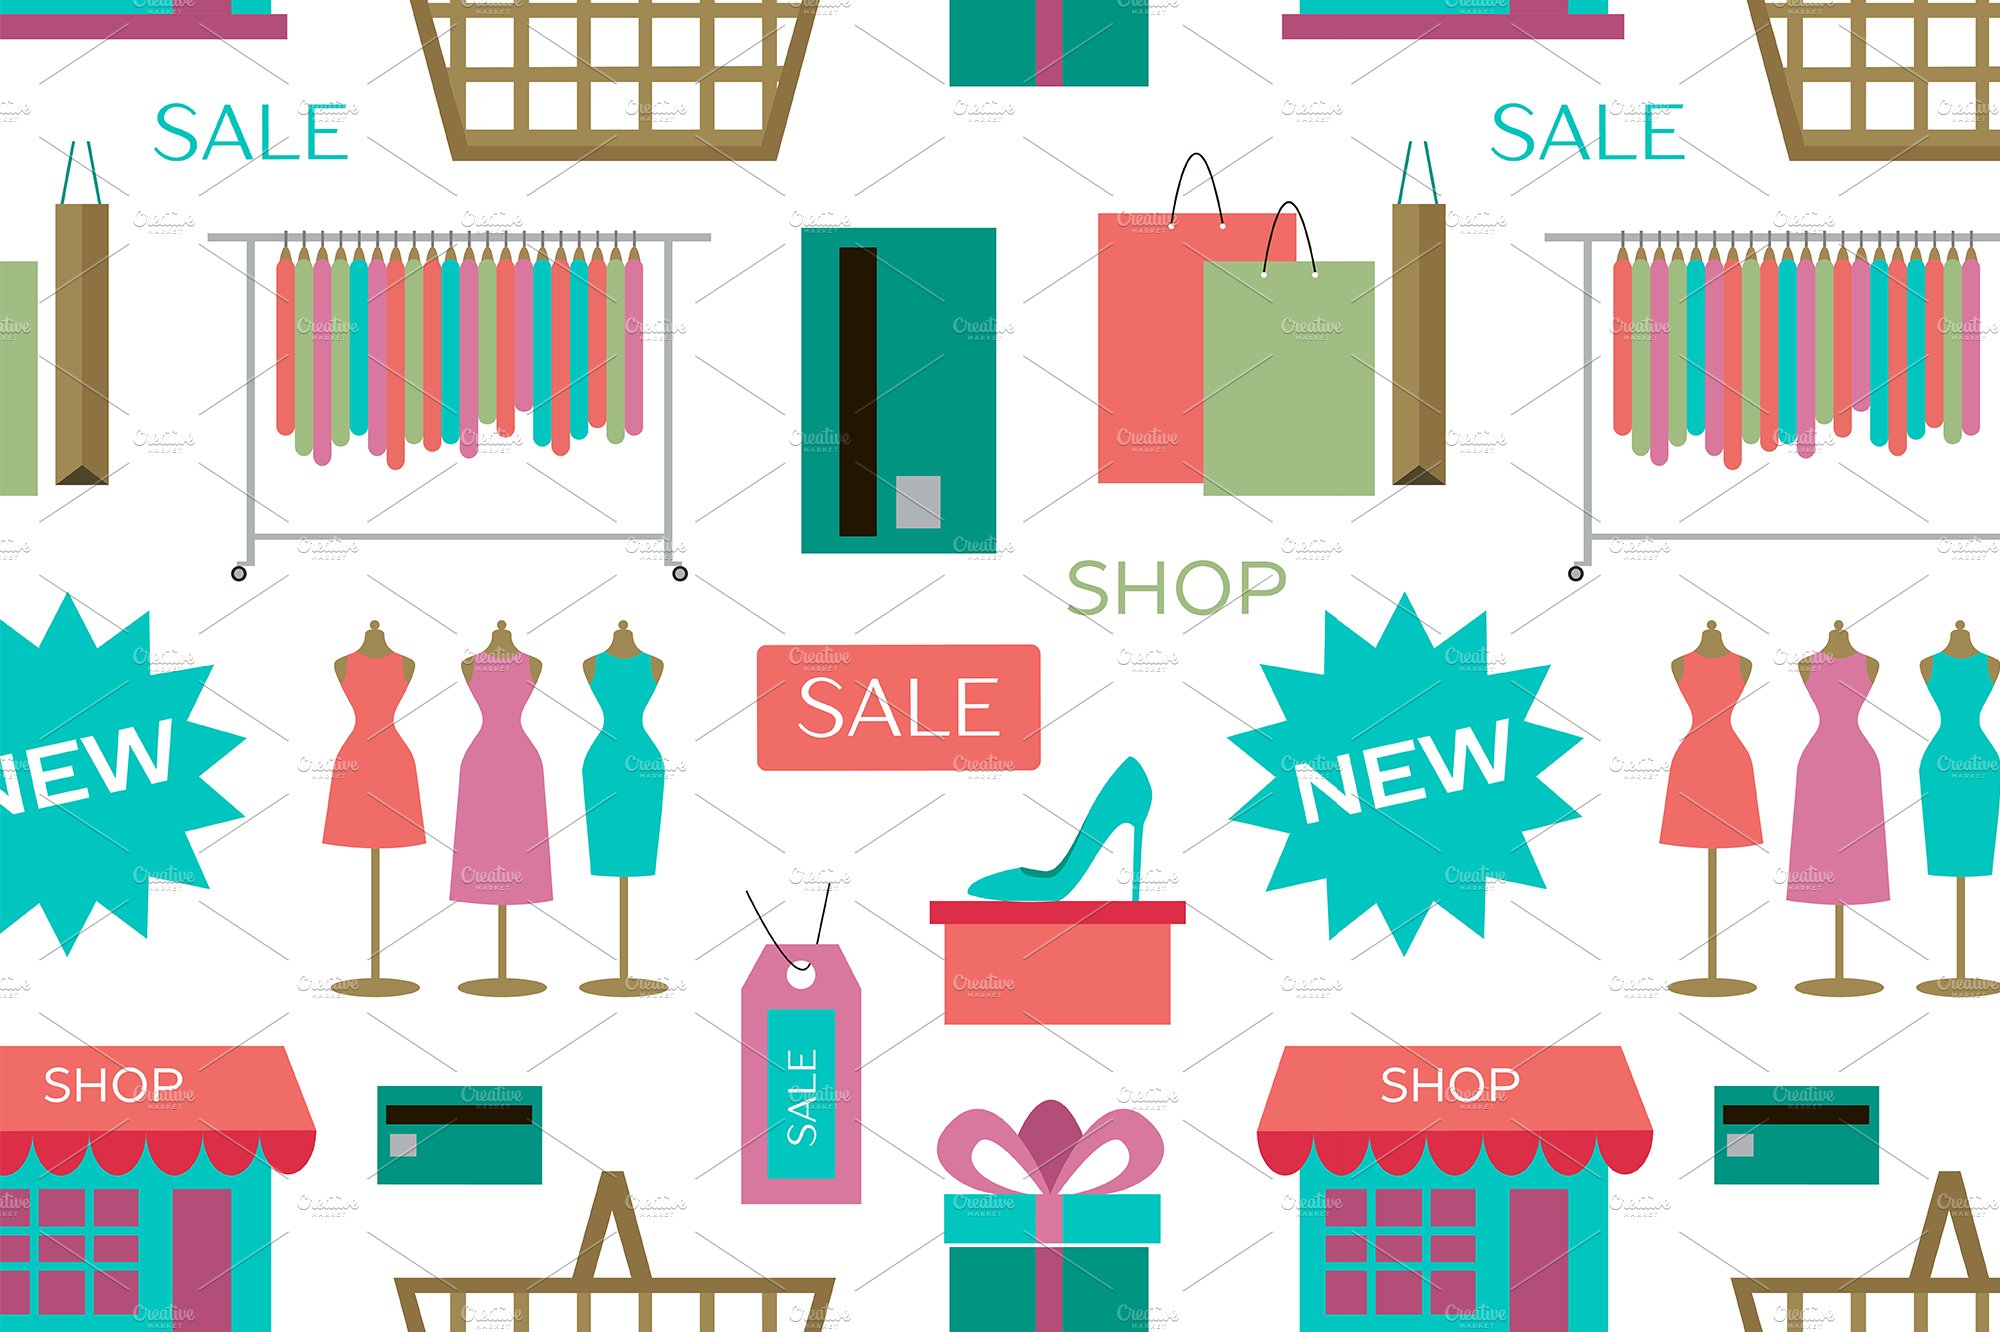 Set of shopping icons pattern cover image.